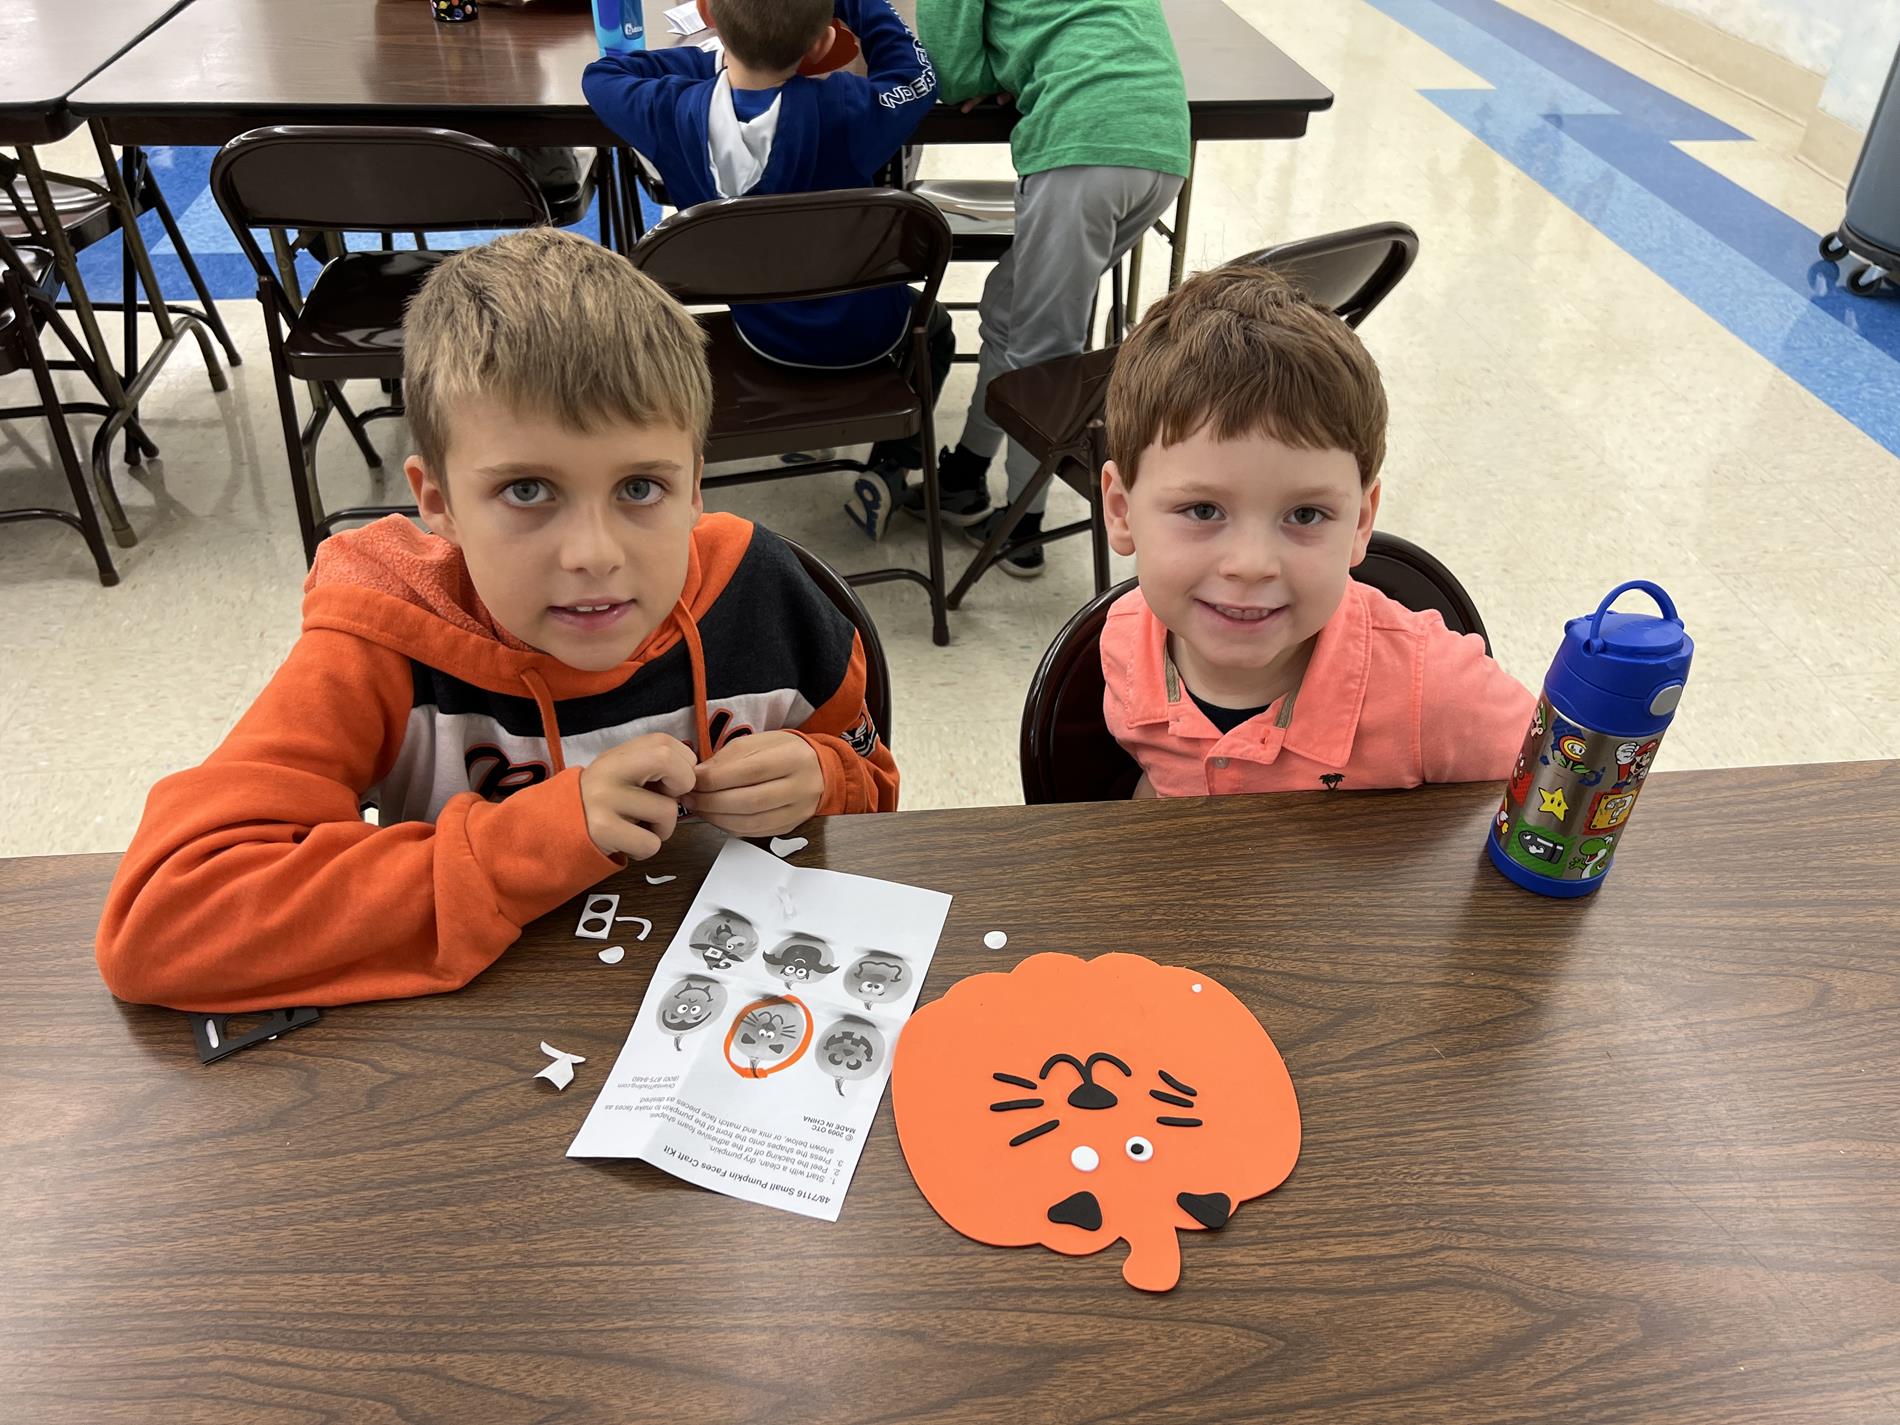 older student with younger student decorating a pumpkin